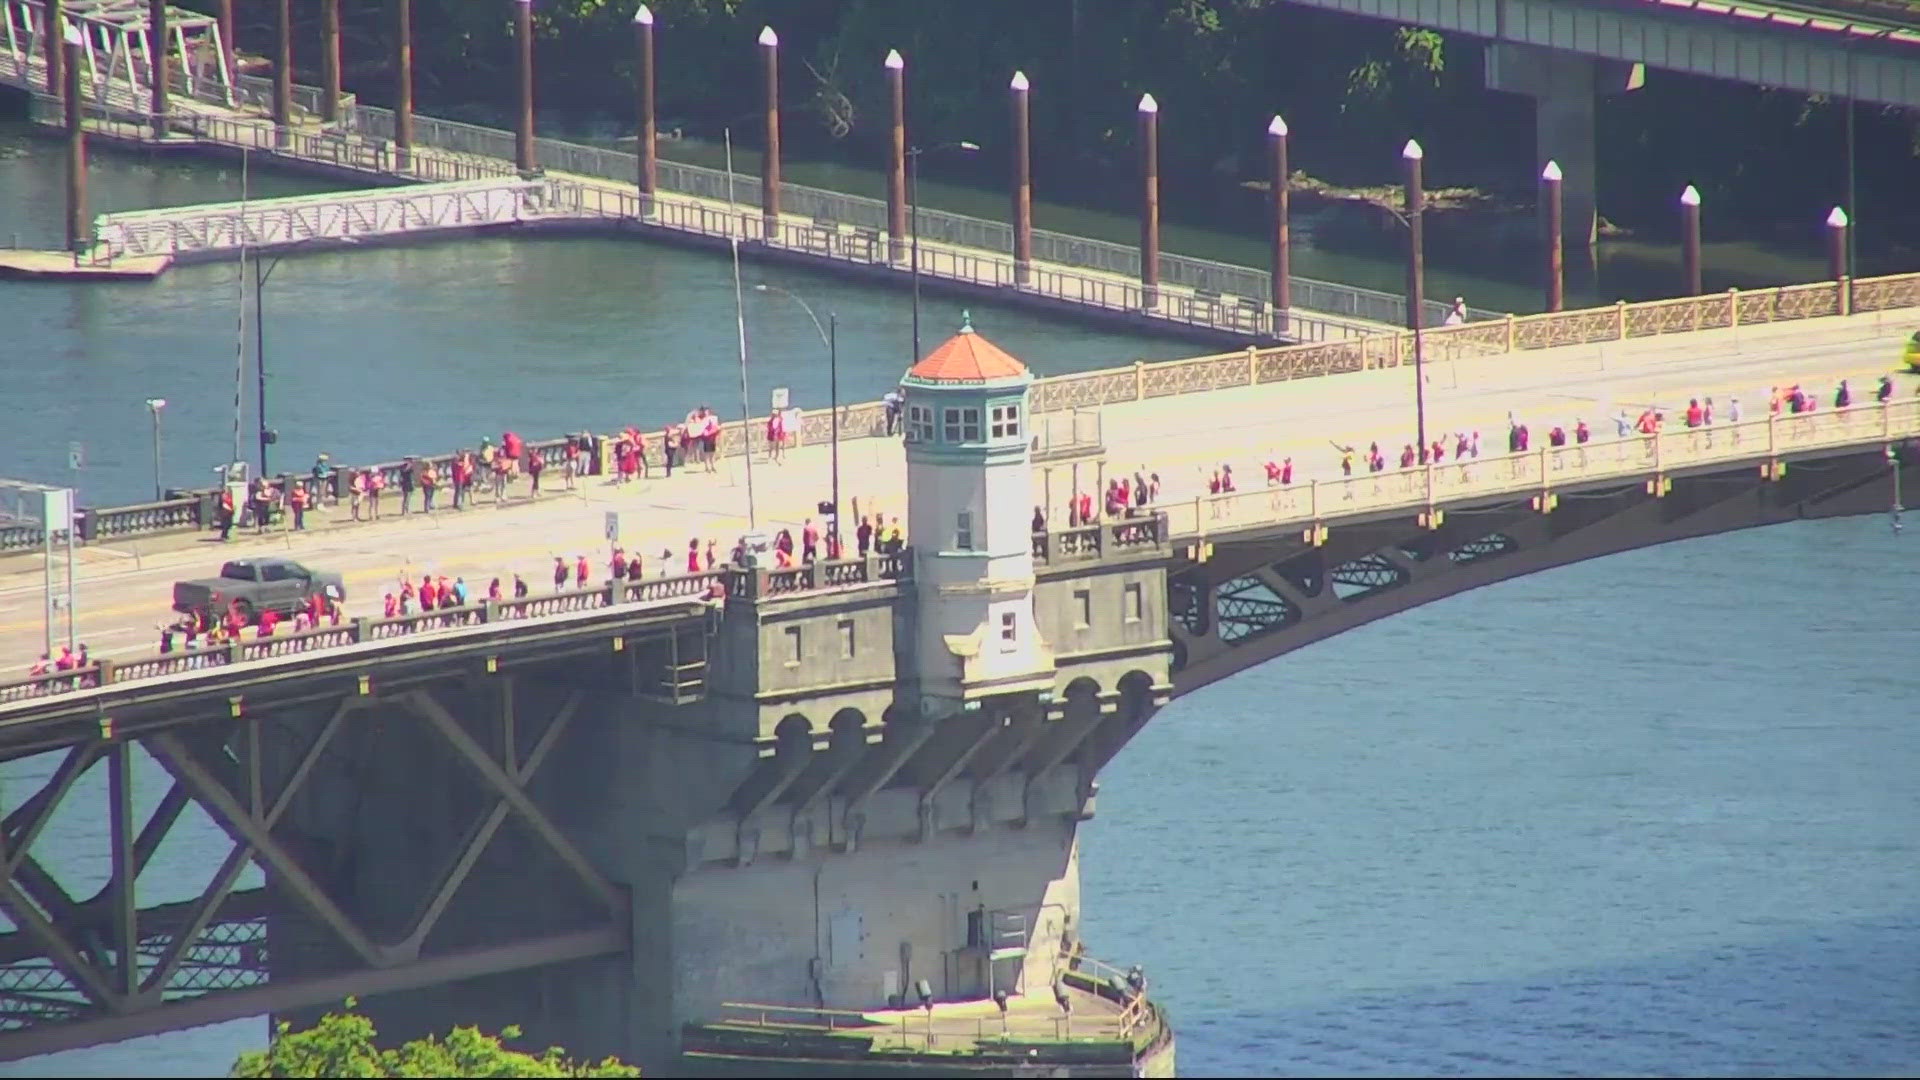 The strike in Portland was part of nationwide events marking two years since the Supreme Court’s decision to overturn Roe v. Wade. Bridge traffic was not disrupted.